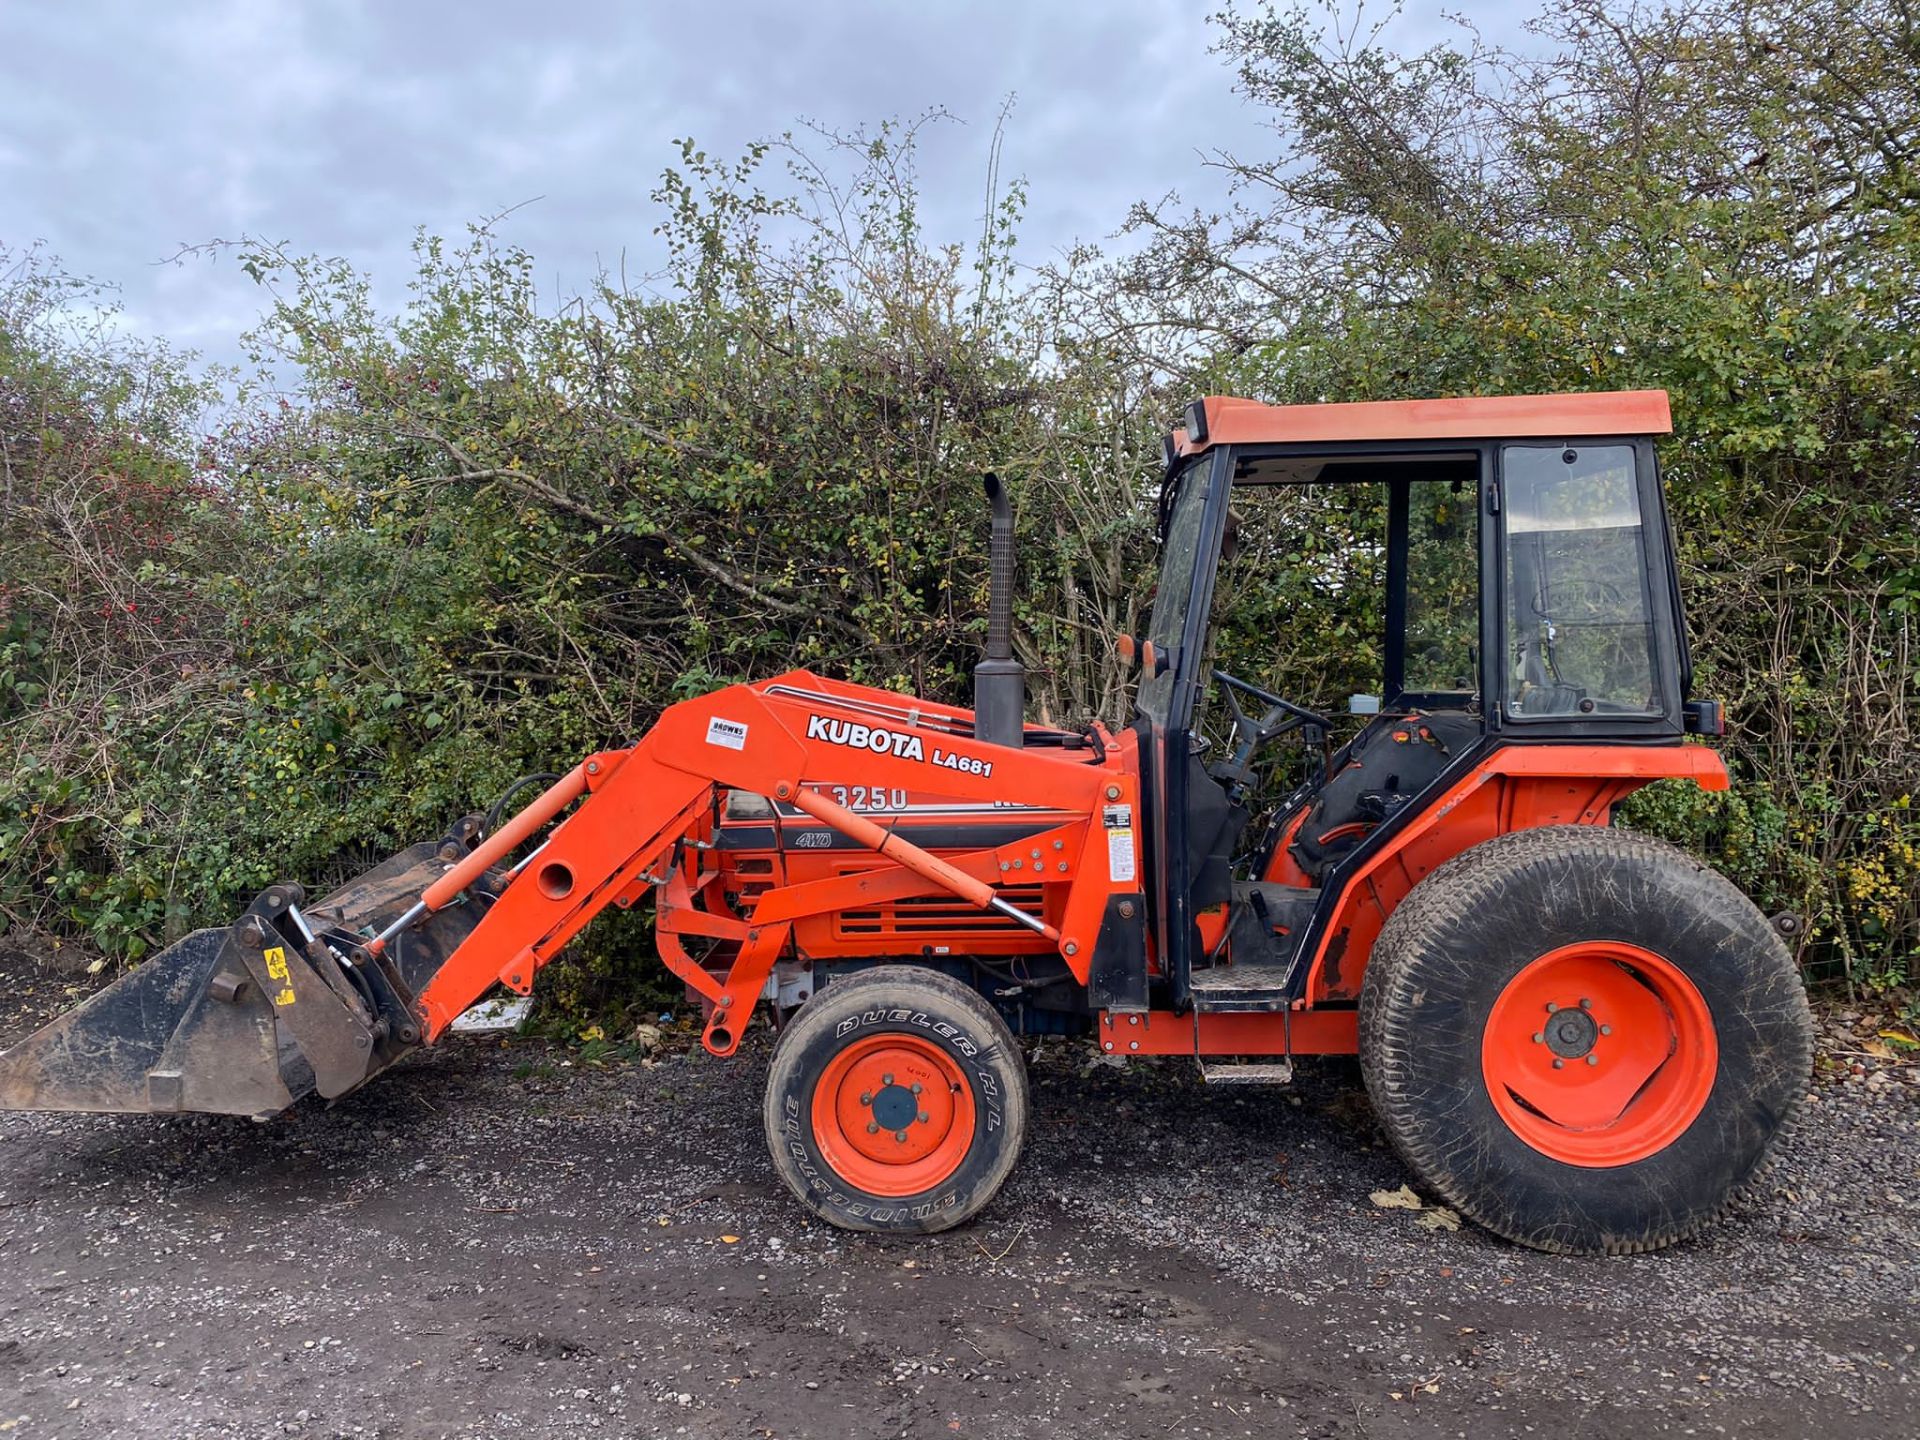 KUBOTA L3250 TRACTOR WITH FRONT LOADER.LOCATION NORTH YORKSHIRE. - Image 5 of 7